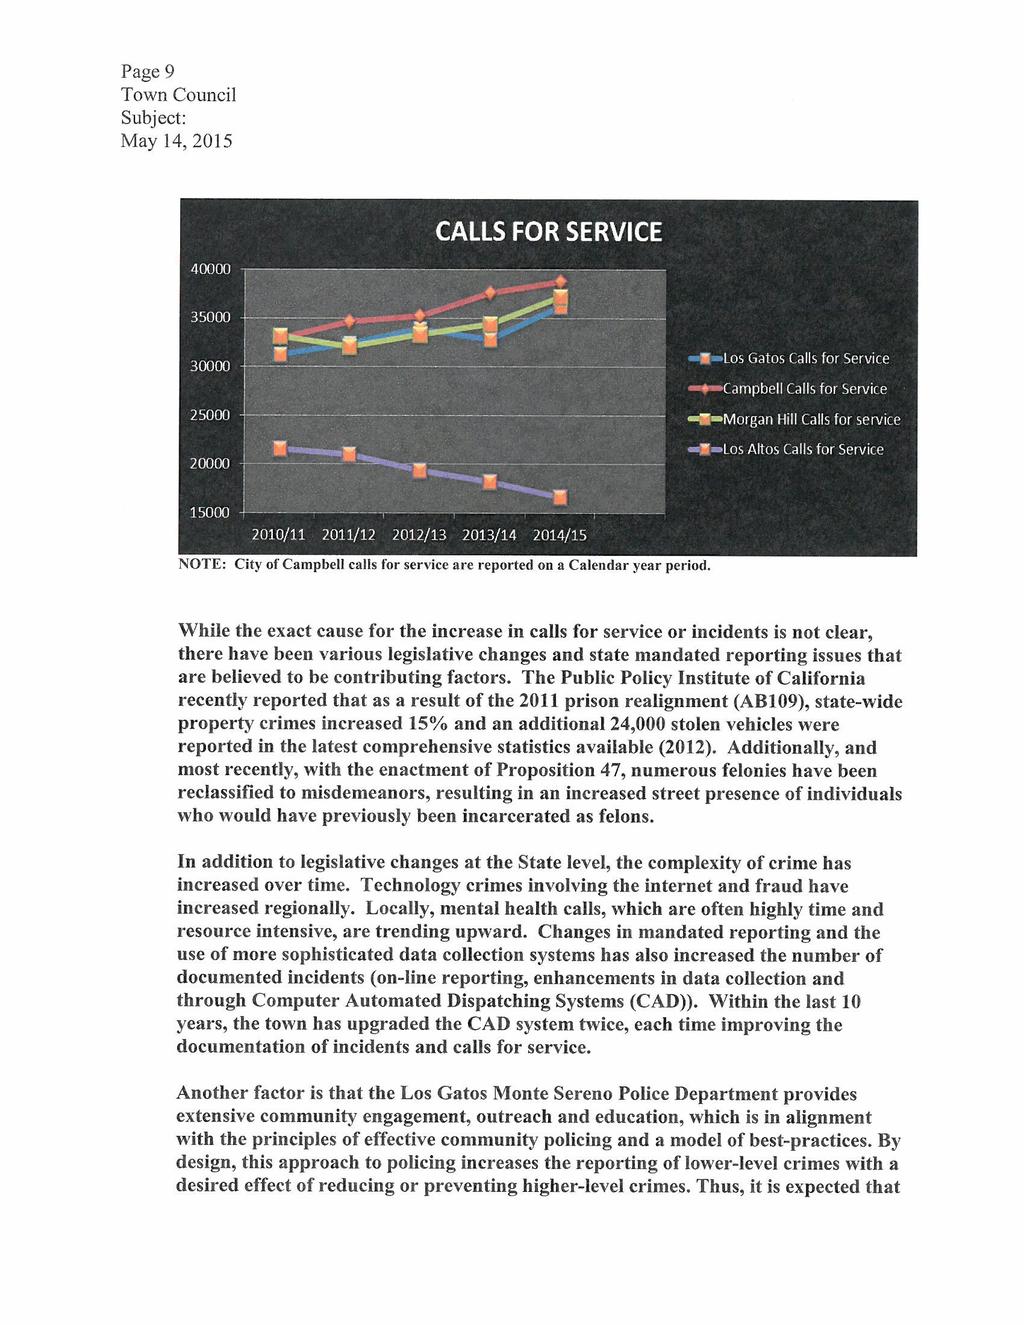 Page 9 Subj ect: While the exact cause for the increase in calls for service or incidents is not clear, there have been various legislative changes and state mandated reporting issues that are